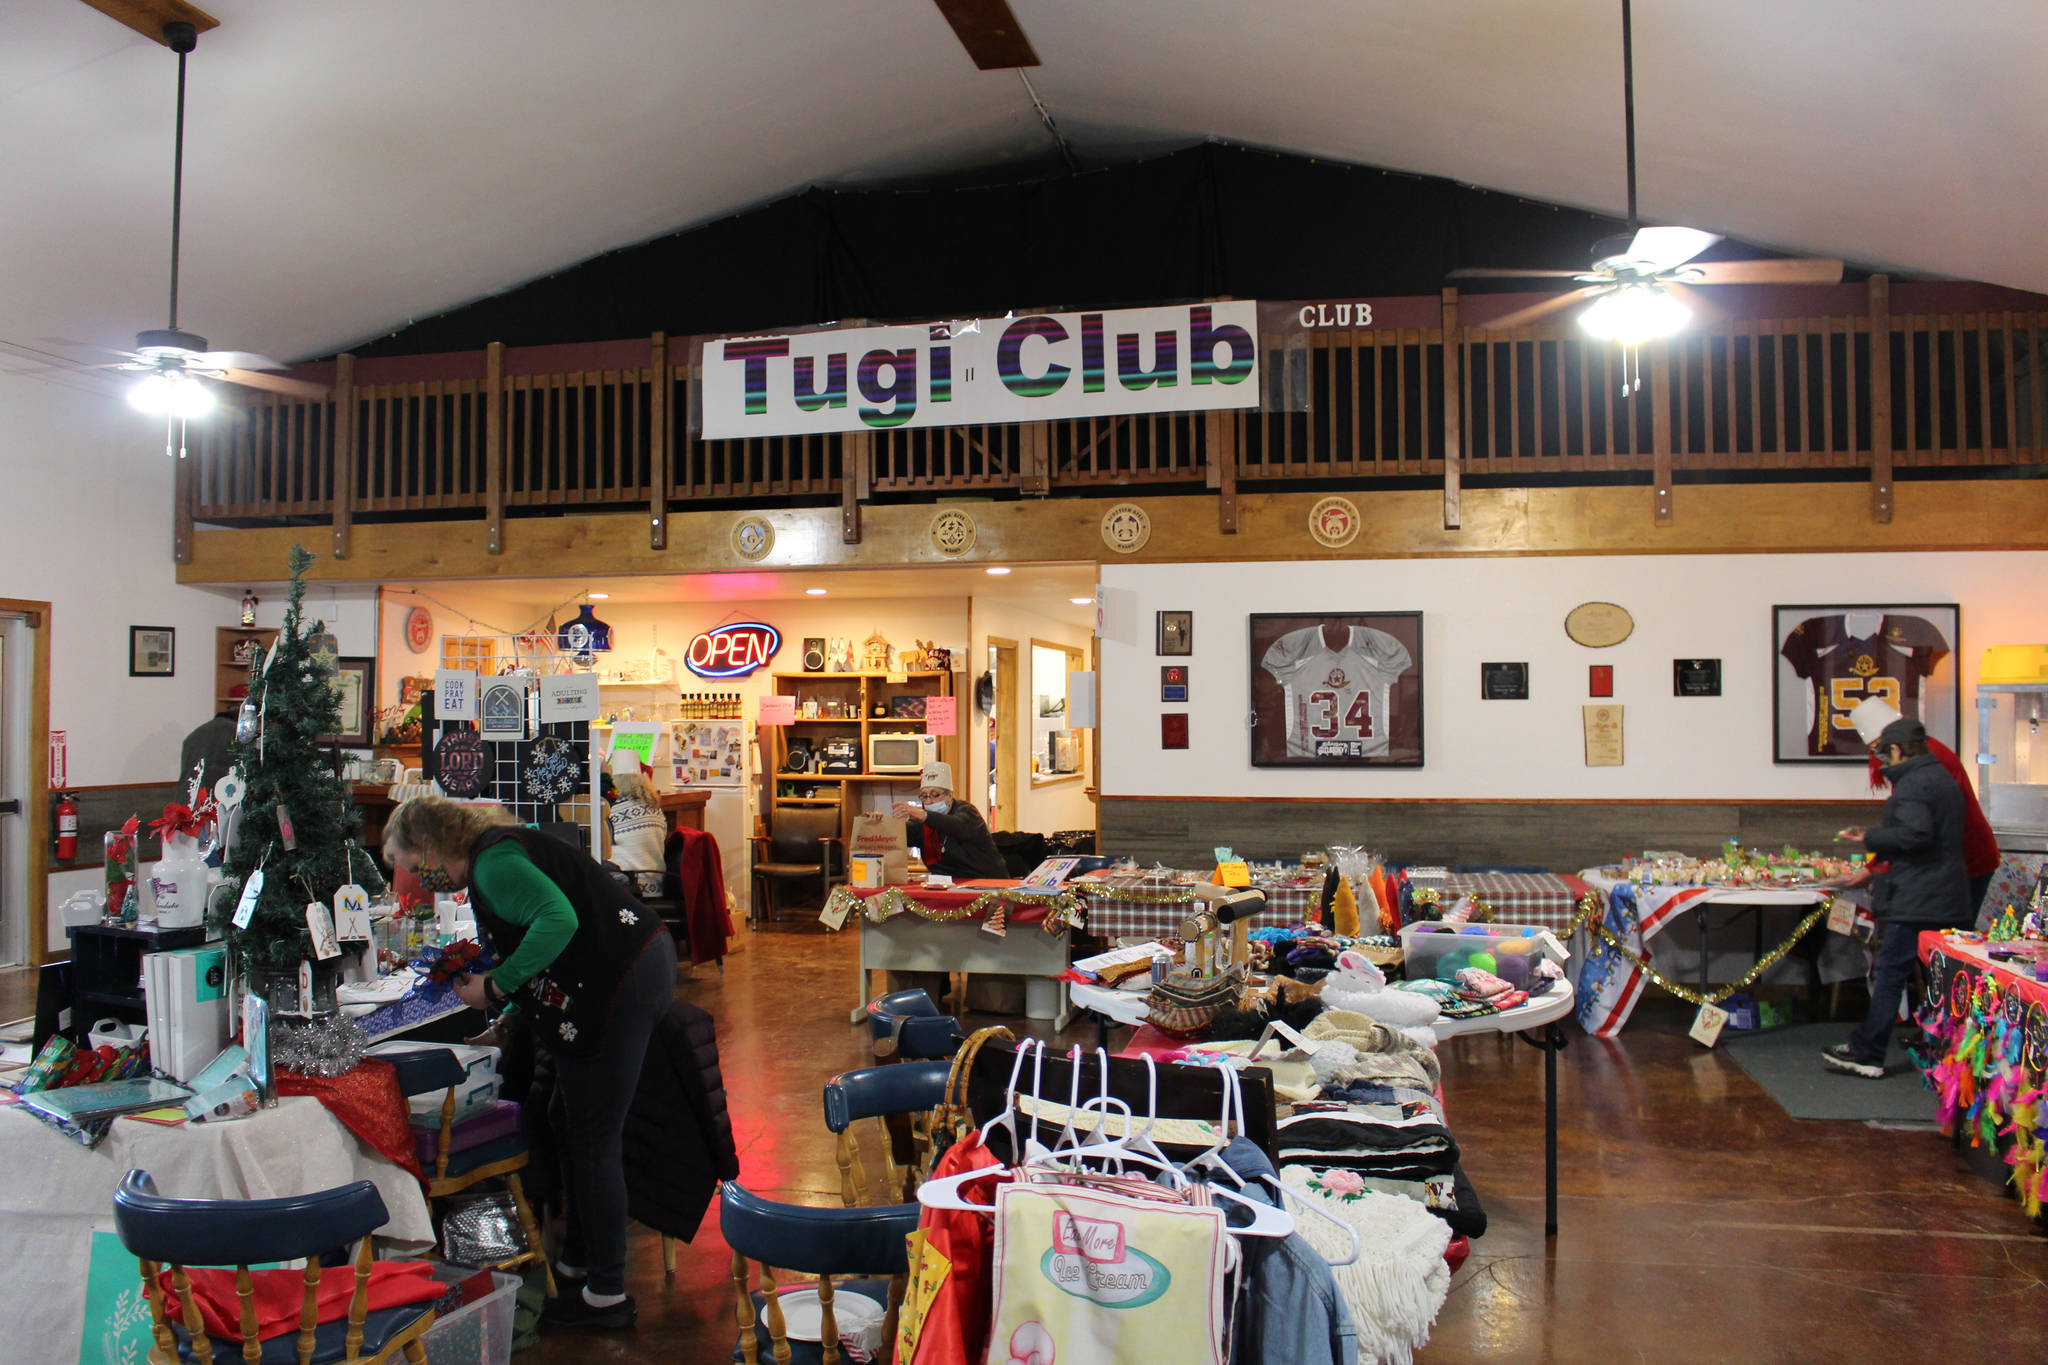 Photo by Brian Mazurek/Peninsula Clarion 
Members of the local Tugi II club of the Lady Shriners of Alaska held a craft fair at the Kenai Soldotna Shrine Club on Dec. 5 and Dec. 6 in Soldotna, Alaska, with proceeds from the fair going to Alaska Shrine Kids and the Kenai Peninsula Food Bank.